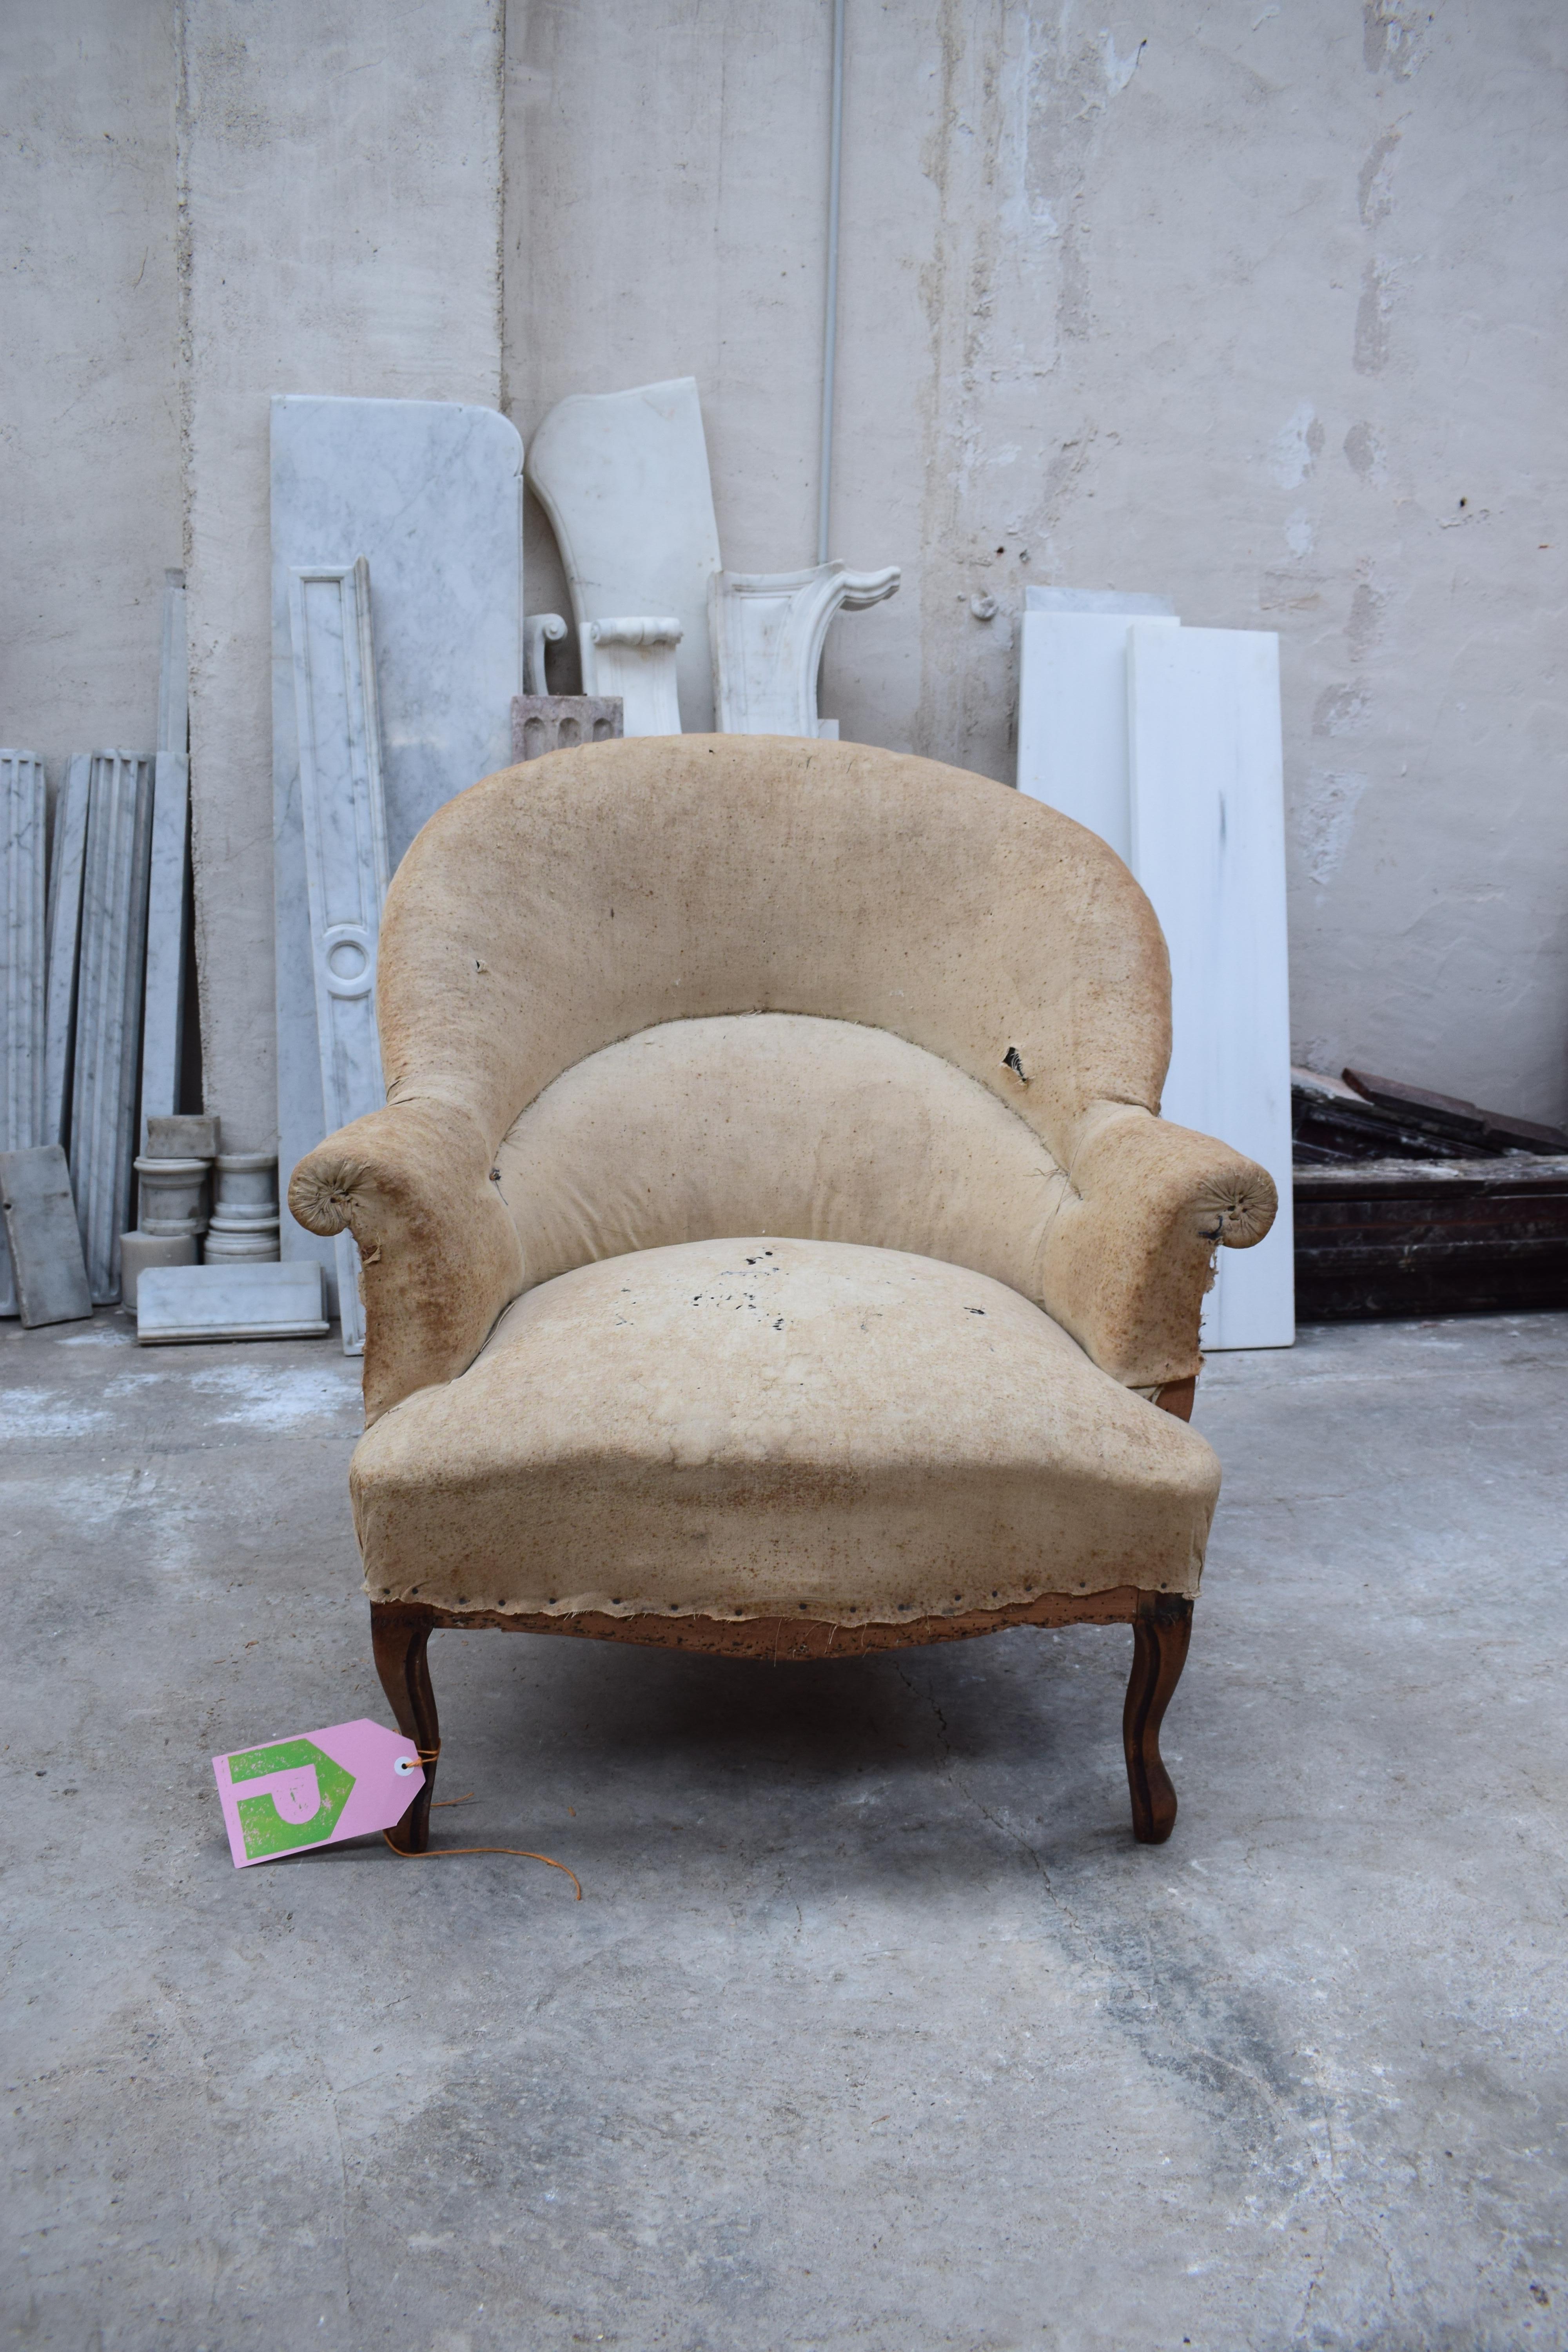 19th Century French Napoleon III Style Tub Chair Dating from Around 1850